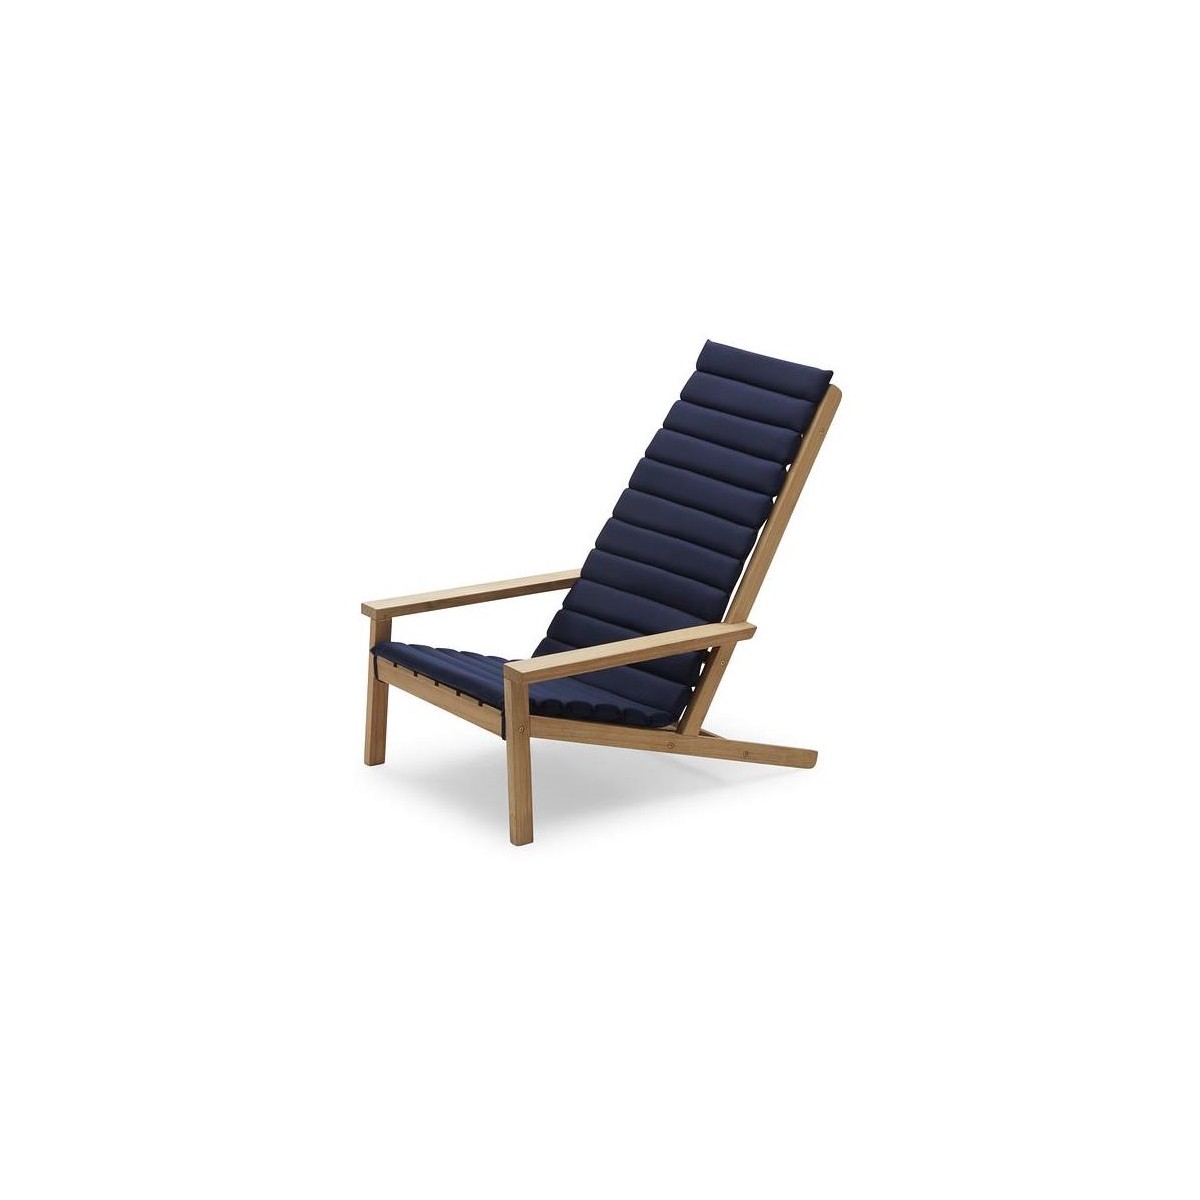 SOLD OUT Marine Cushion for Between Lines Deck Chair – Skagerak